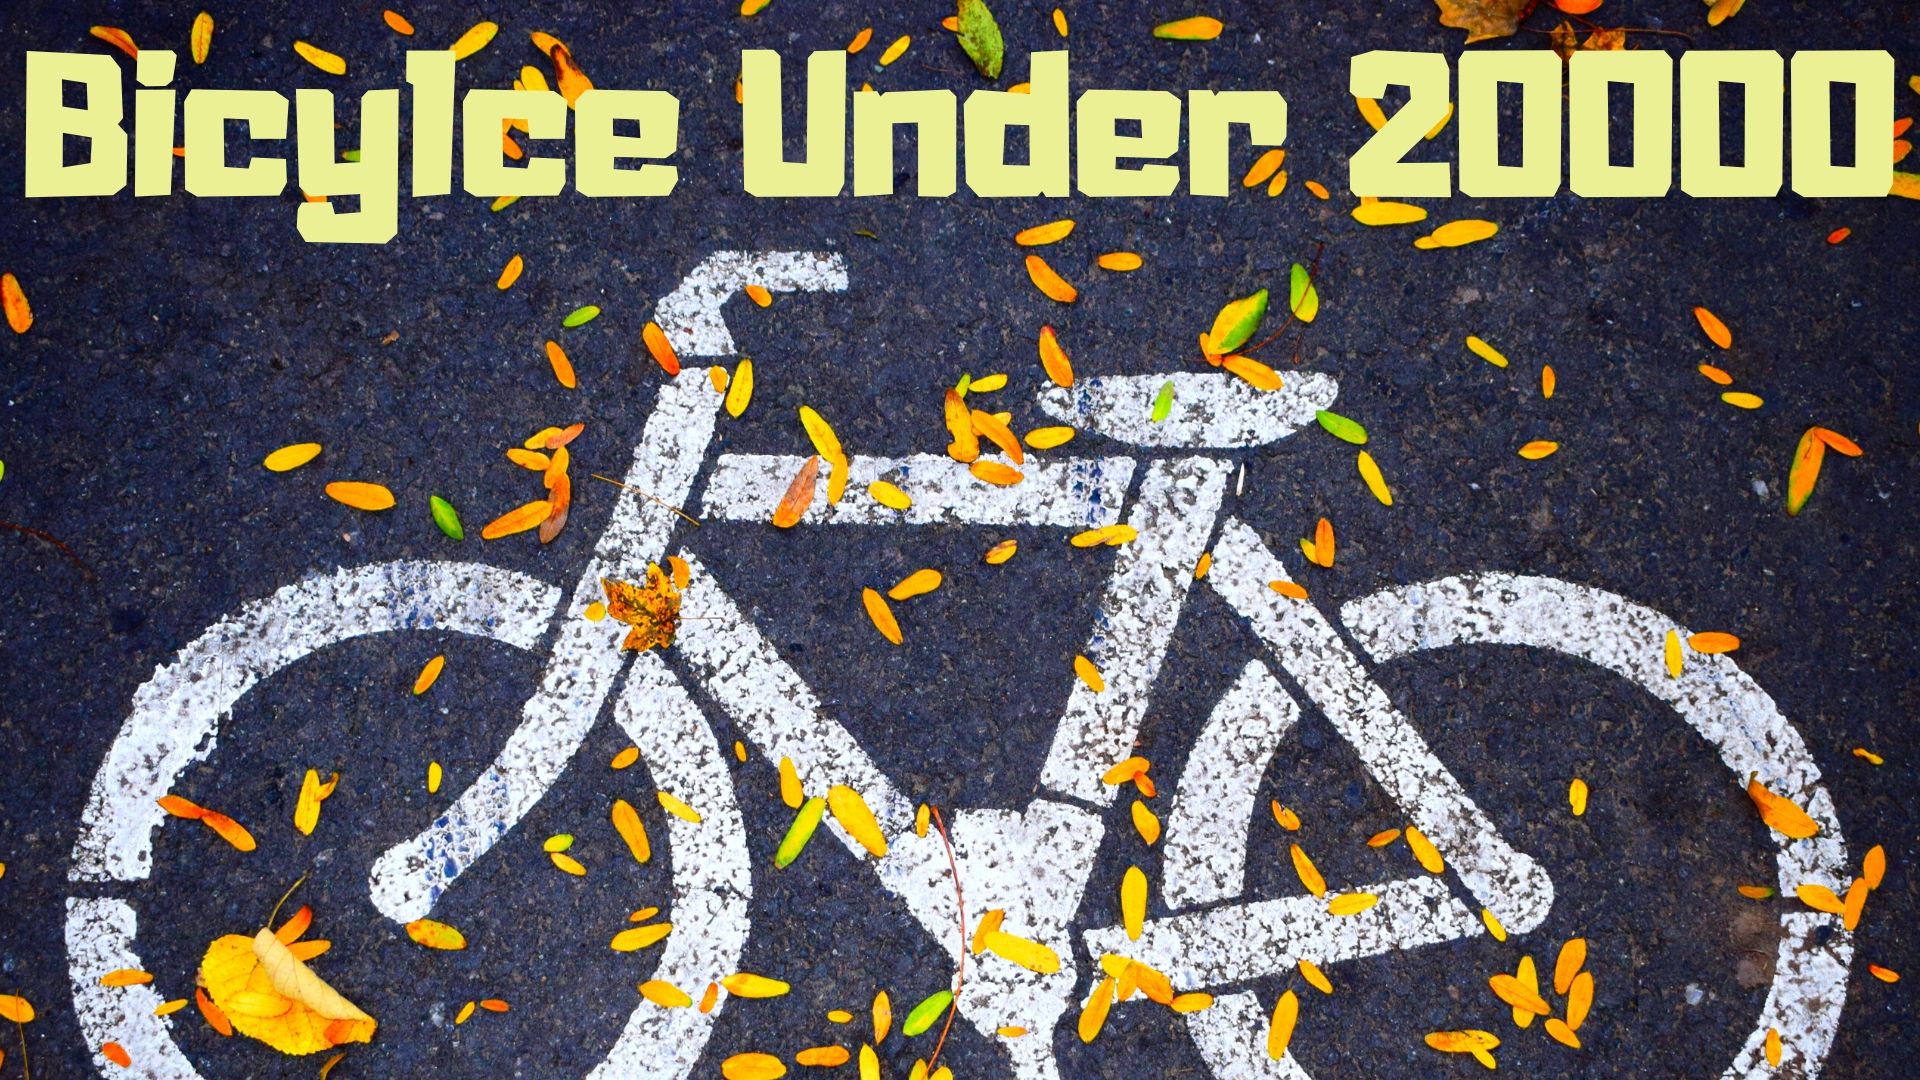 road cycles under 20000